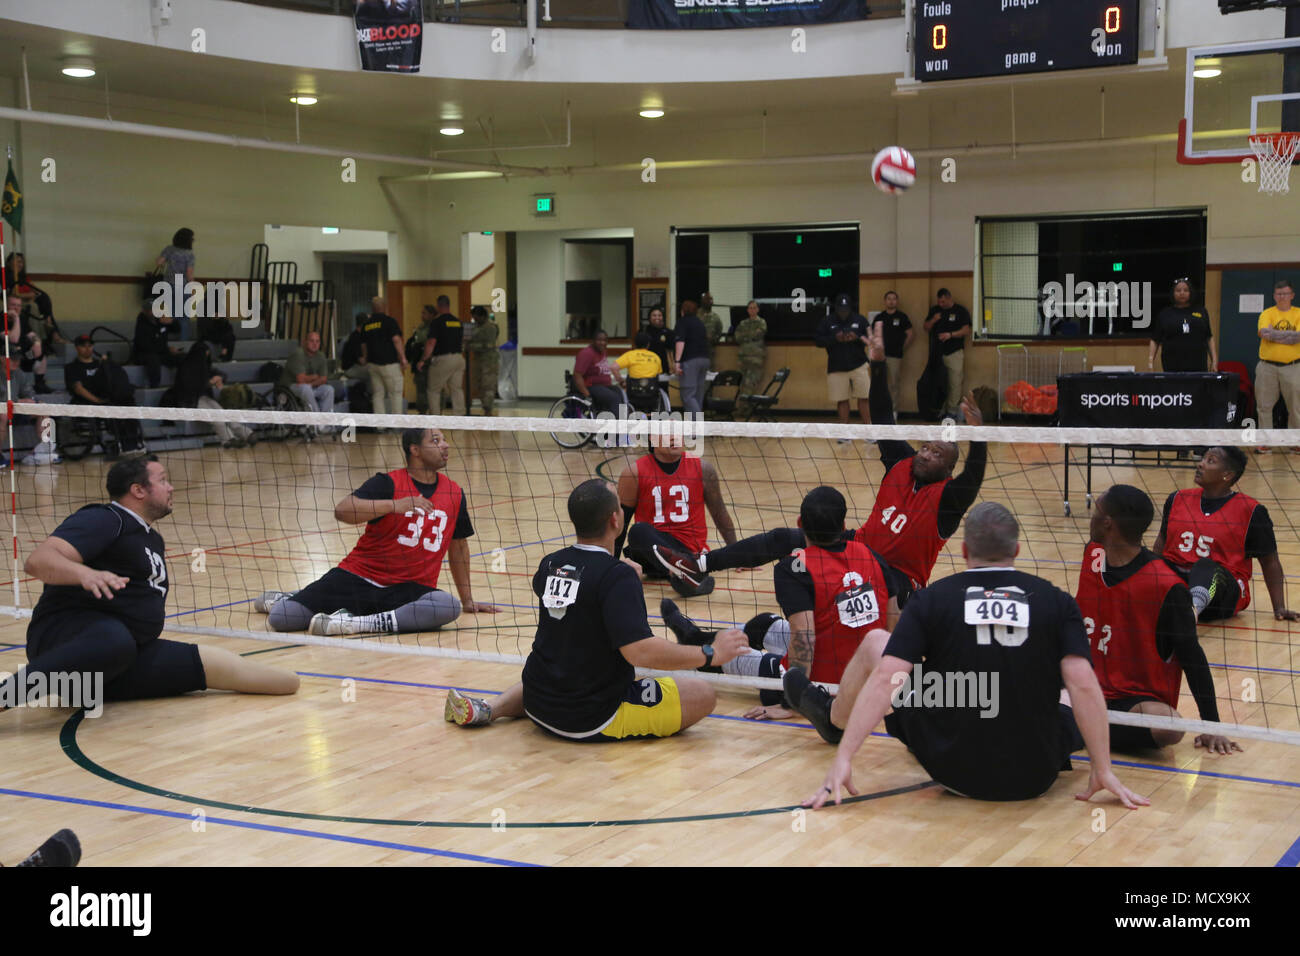 Athletes participate in the 2018 Army Trials in seated volleyball at Fort Bliss, Texas, March 3, 2018. 74 wounded, ill, or injured active duty Soldiers and veterans participate in a series of events that are held at Fort Bliss, Texas, Feb. 27 through March 9, 2018, as Deputy Chief of Staff, Warrior Care and Transition hosts the 2018 U.S. Army Trials. (U.S. Army photo by Pfc. Tescia Mims) Stock Photo